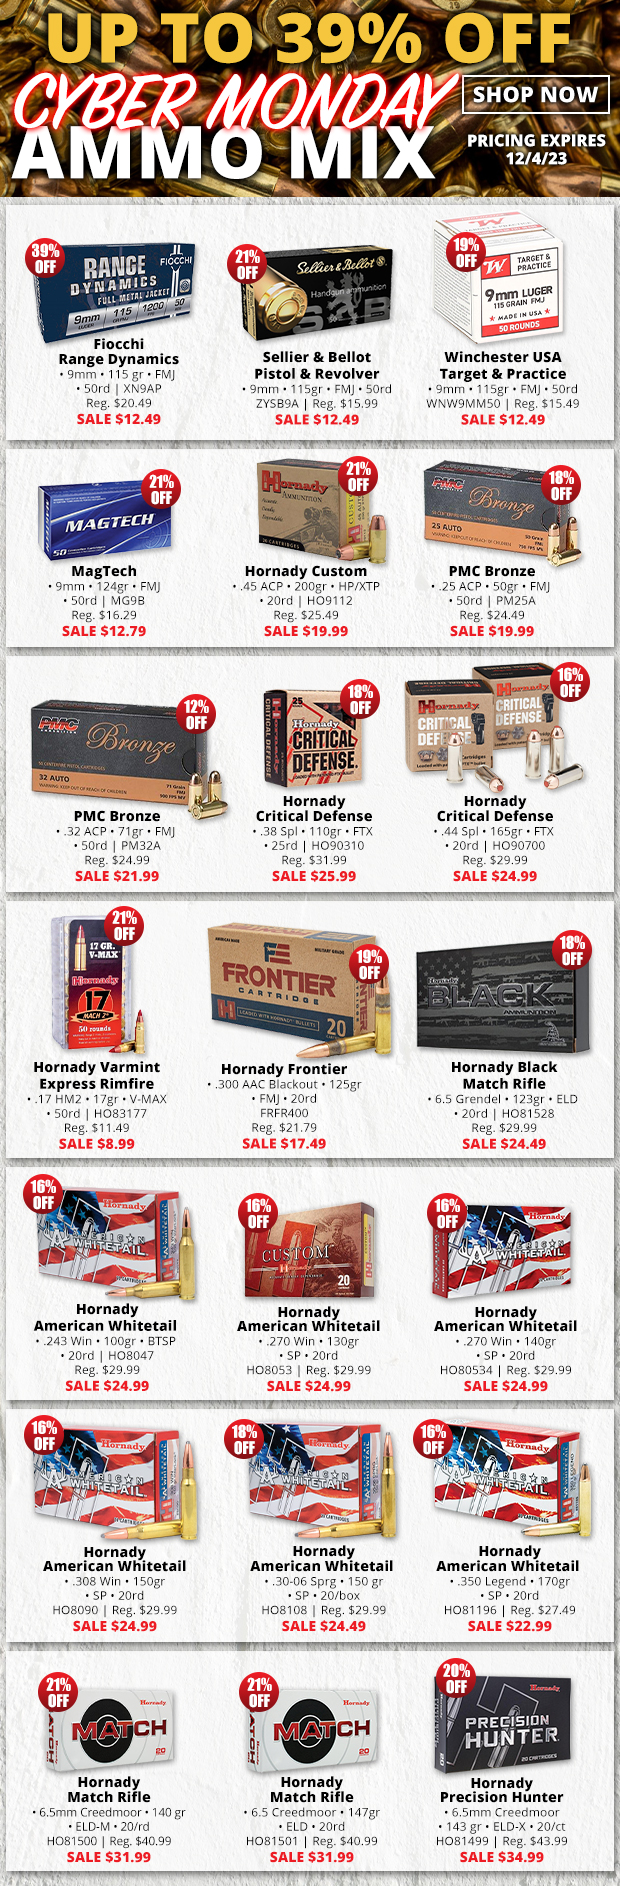 Up to 39% Off Cyber Monday Ammo Mix